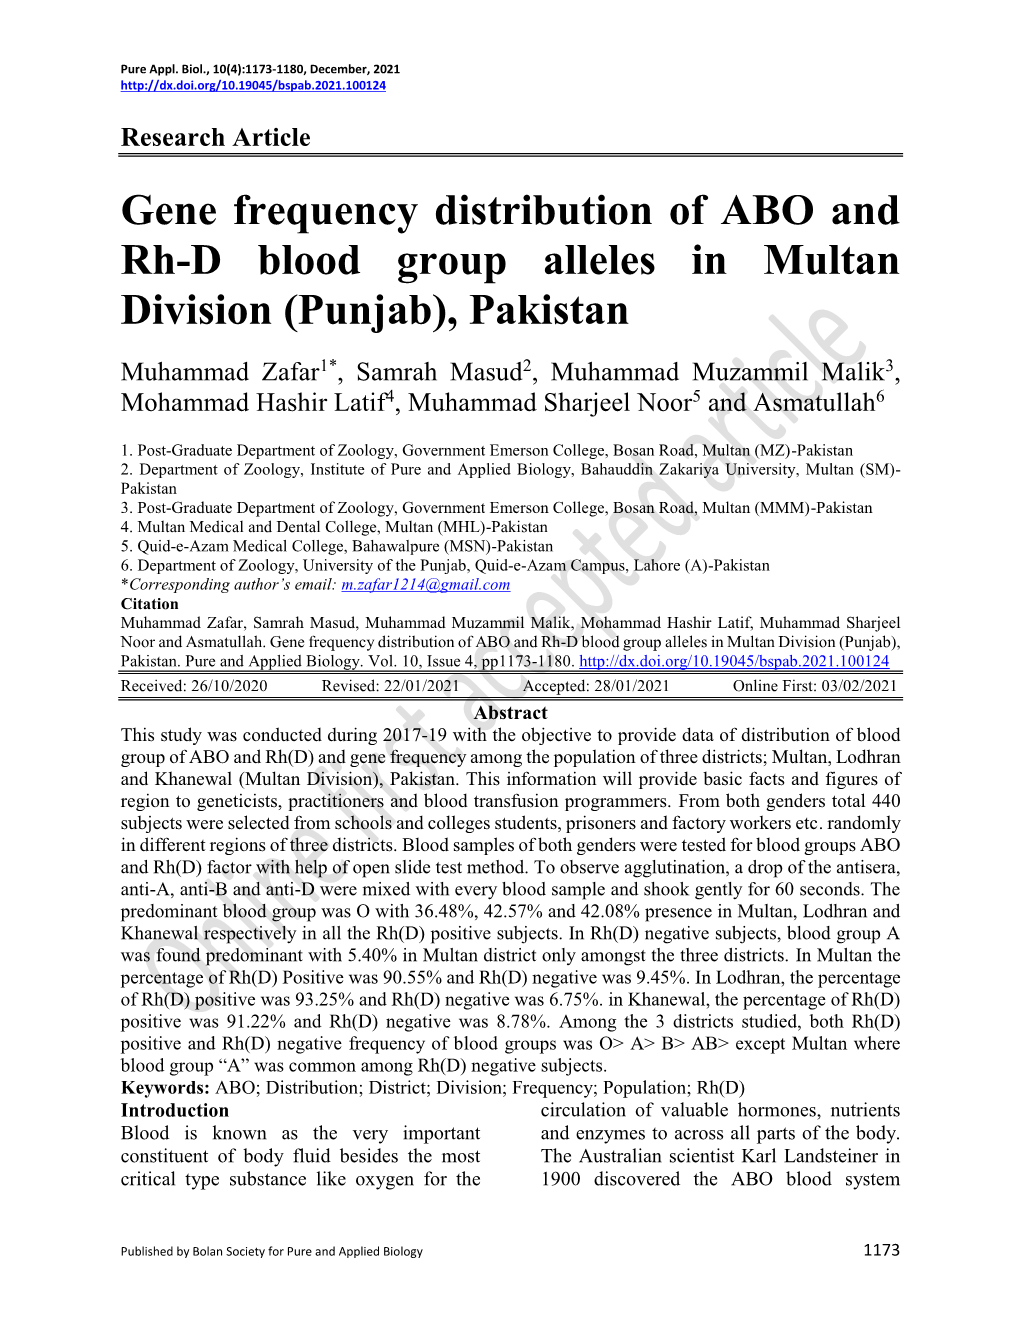 Gene Frequency Distribution of ABO and Rh-D Blood Group Alleles in Multan Division (Punjab), Pakistan